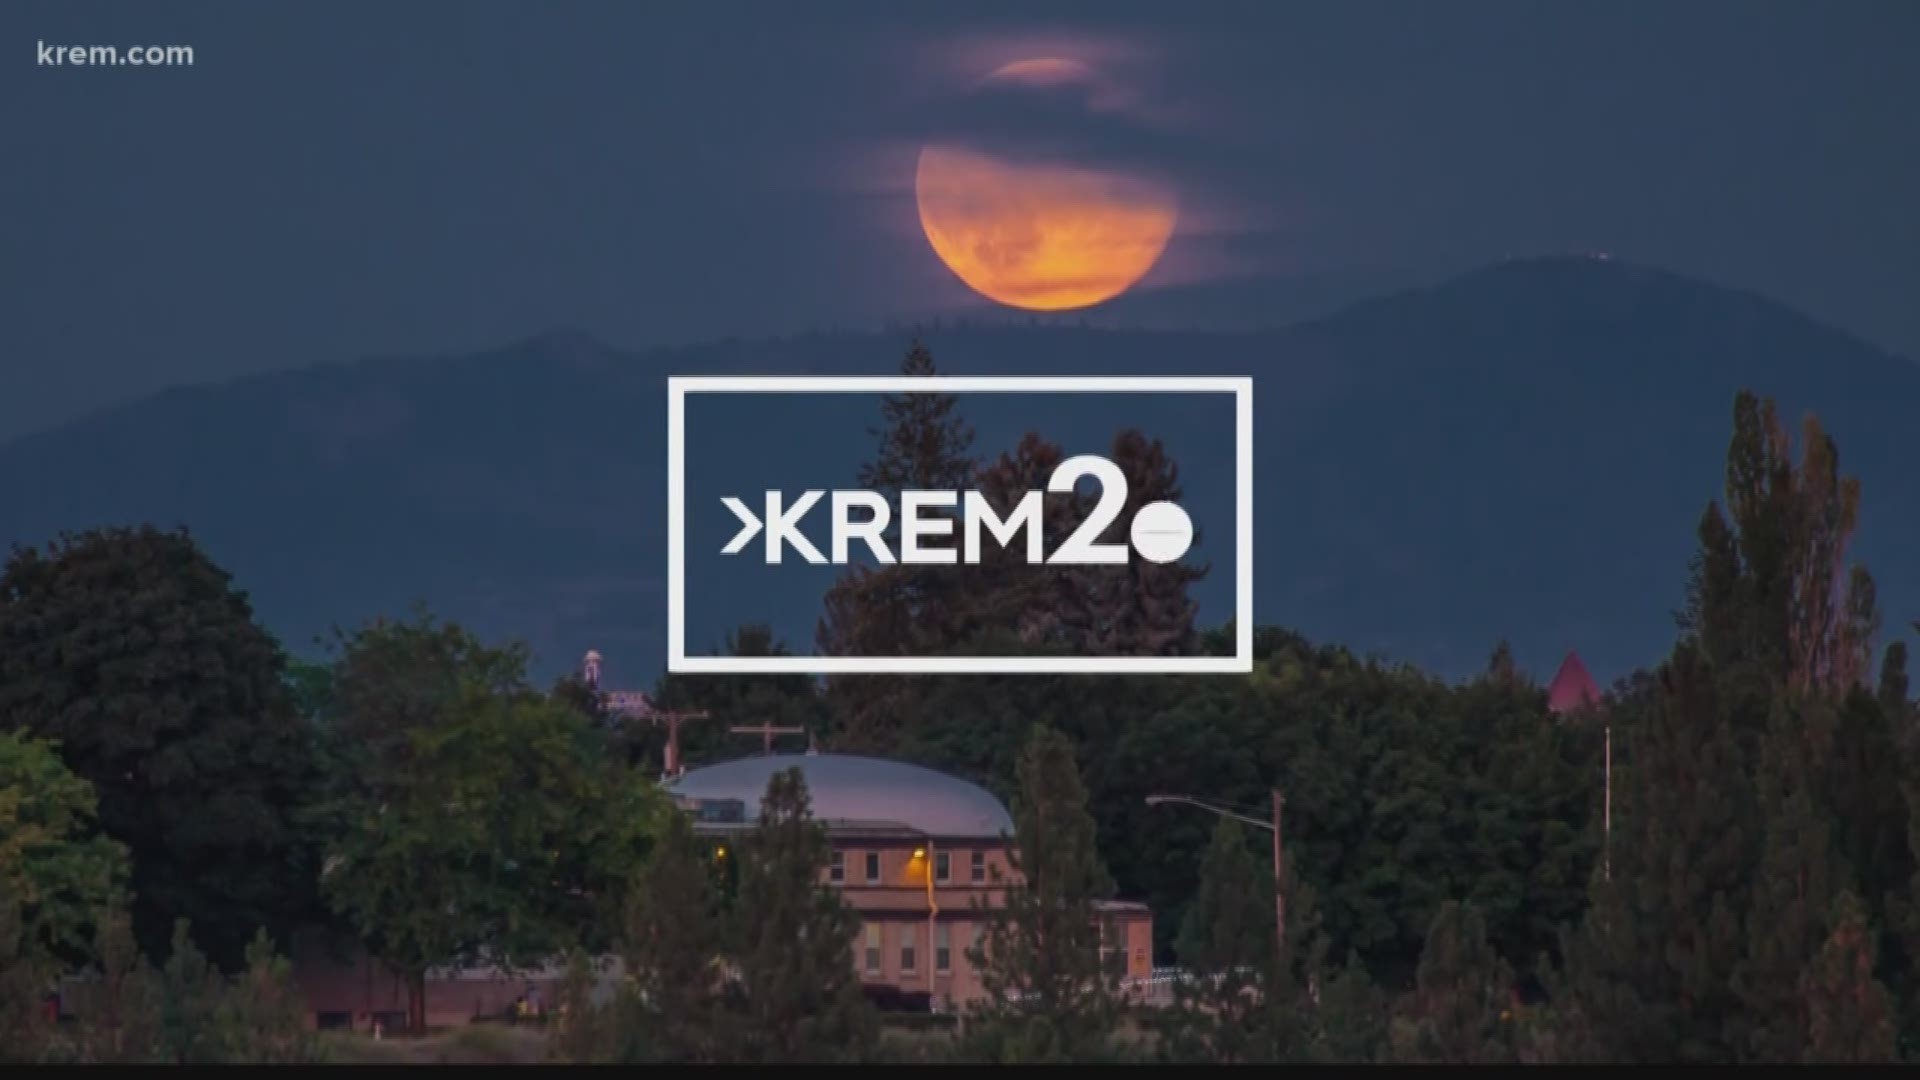 Top stories for Spokane, Eastern Washington, and North Idaho for Thursday, August 15, 2019.